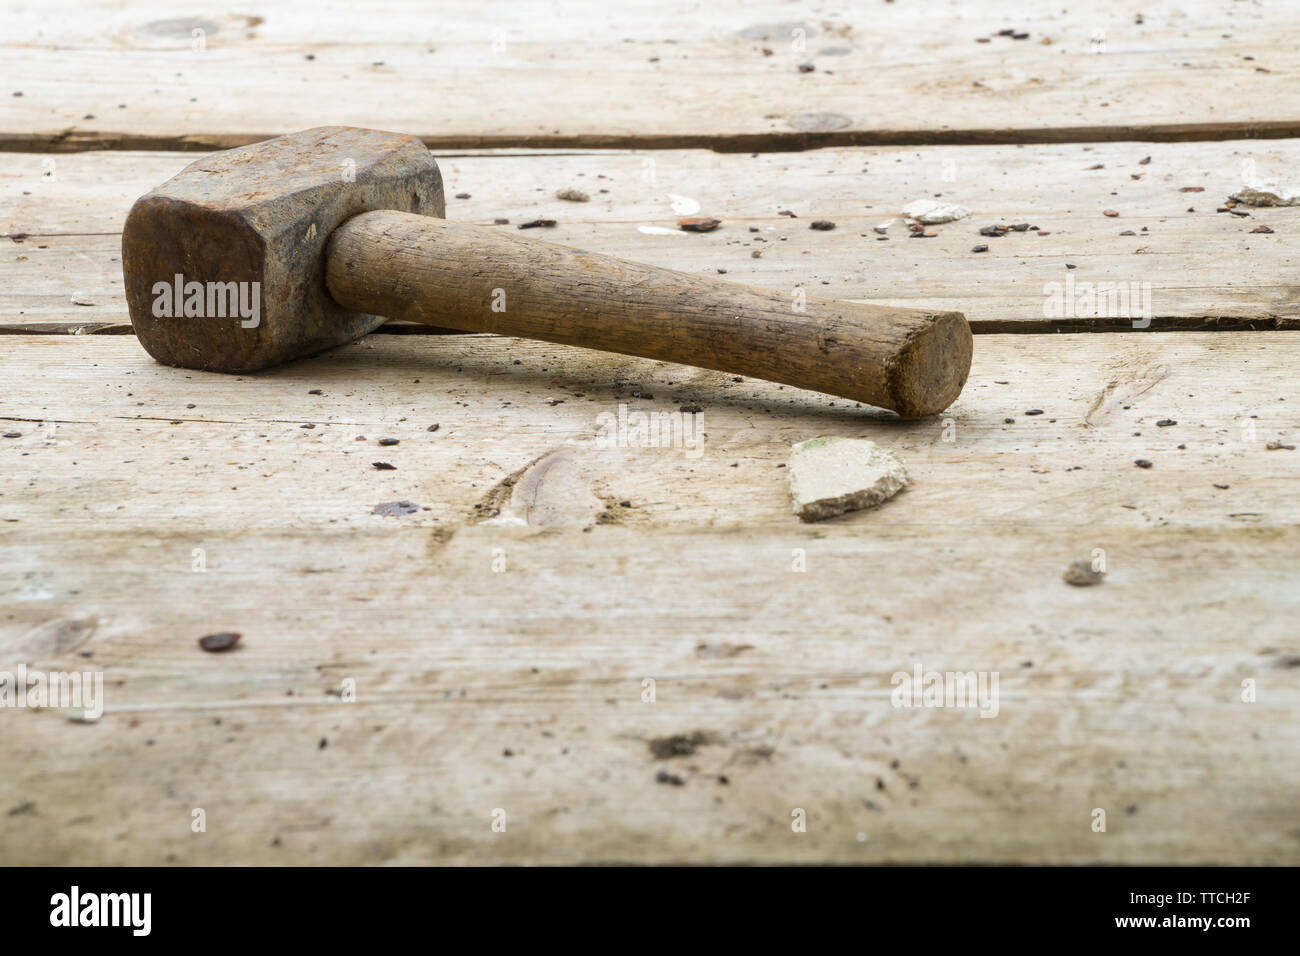 Builder's lump hammer resting on wooden scaffolding planks on a construction site. Potential copy space under hammer. Stock Photo